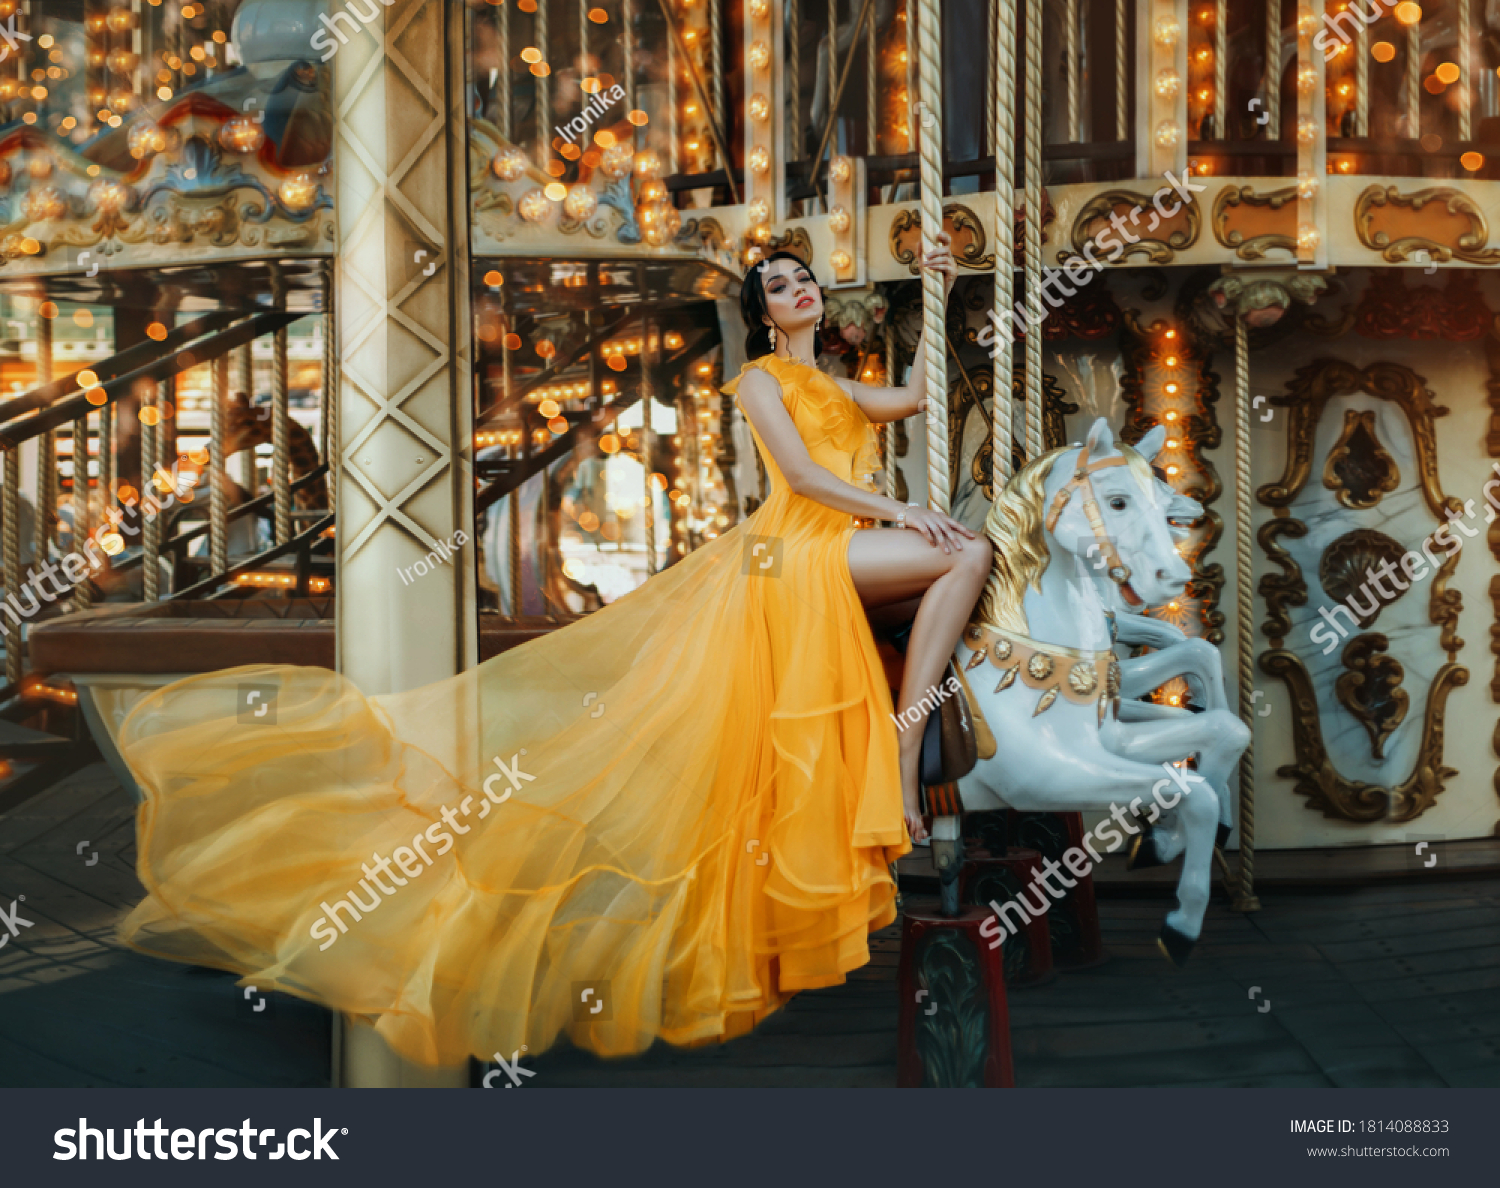 Young beautiful stylish woman sits astride a toy horse, rides a carousel. Long bright yellow dress fluttering in motion #1814088833